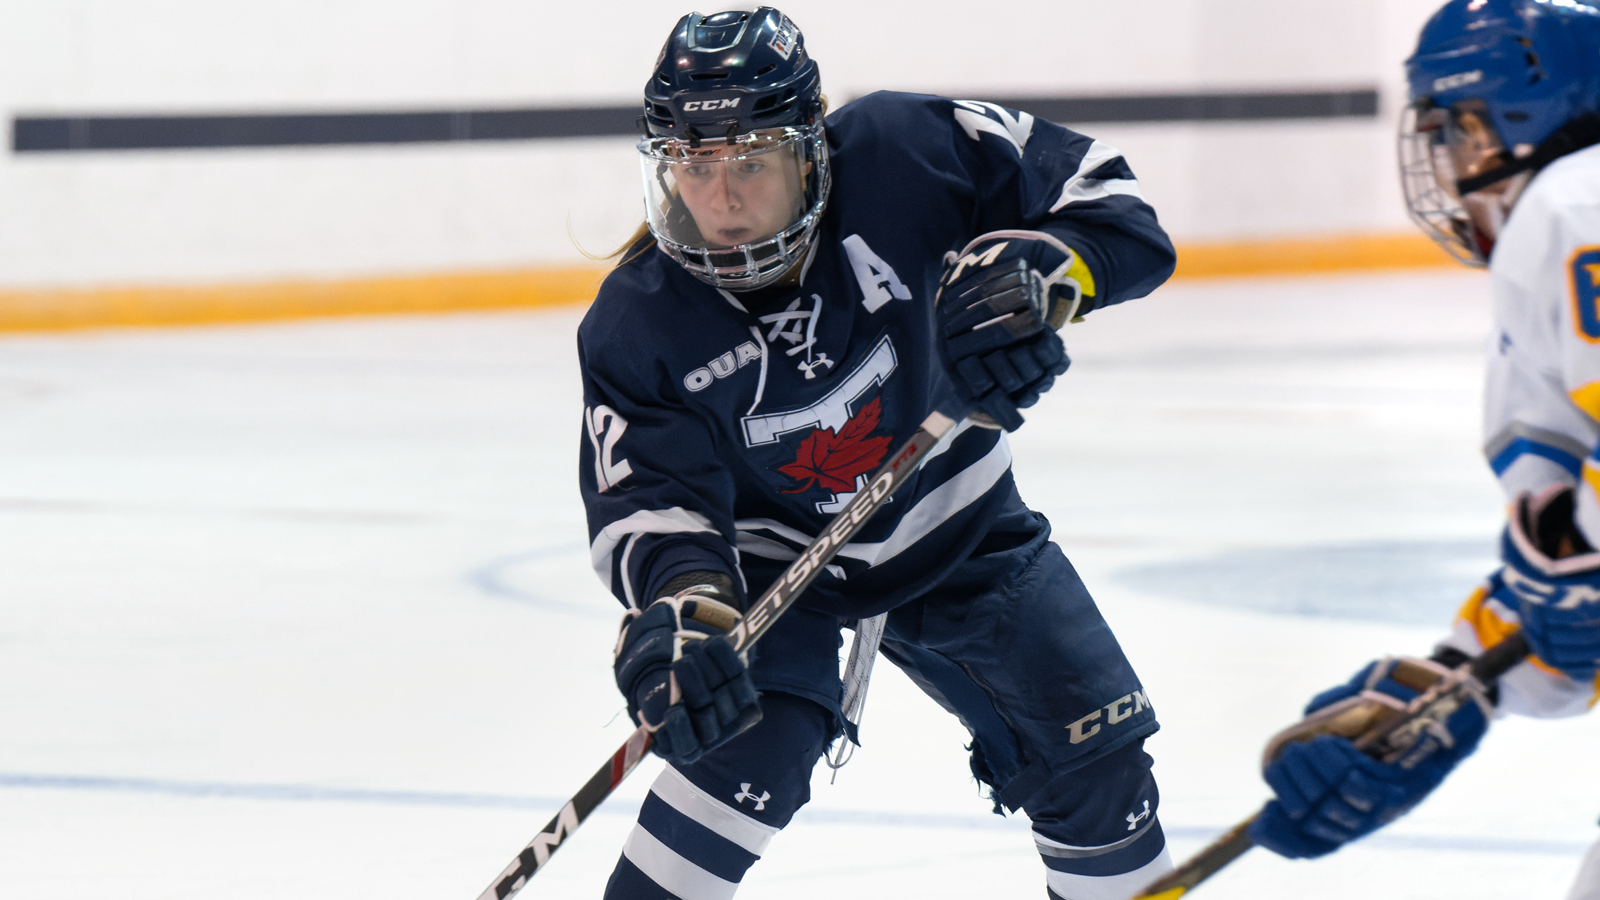 Preview | Toronto takes McCaw Cup aspirations into OUA East Division